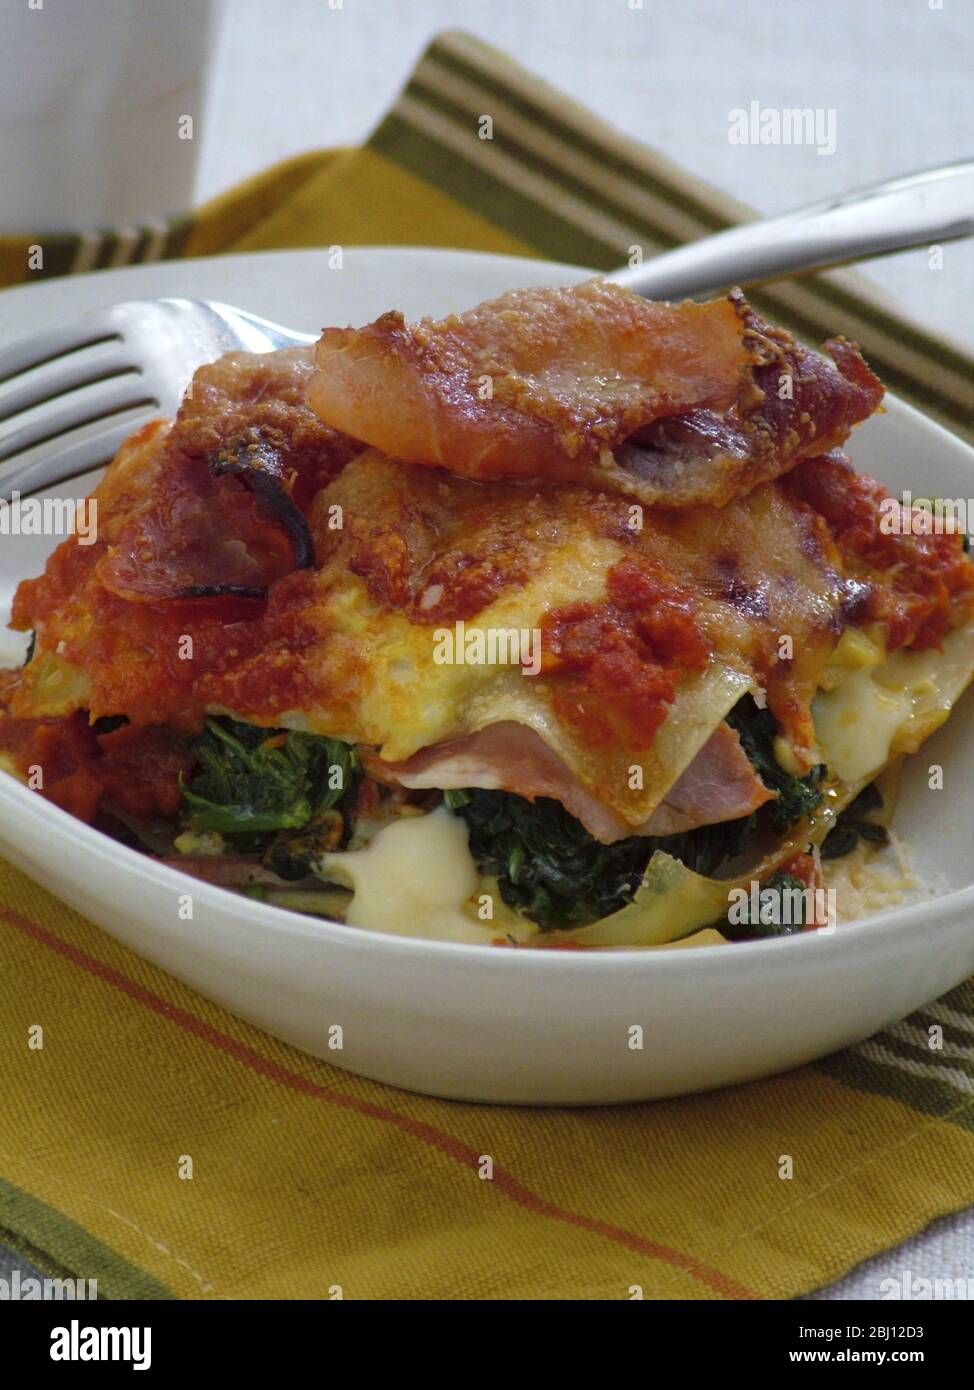 Portion of lasagne with parma ham, spinach and cheese - Stock Photo